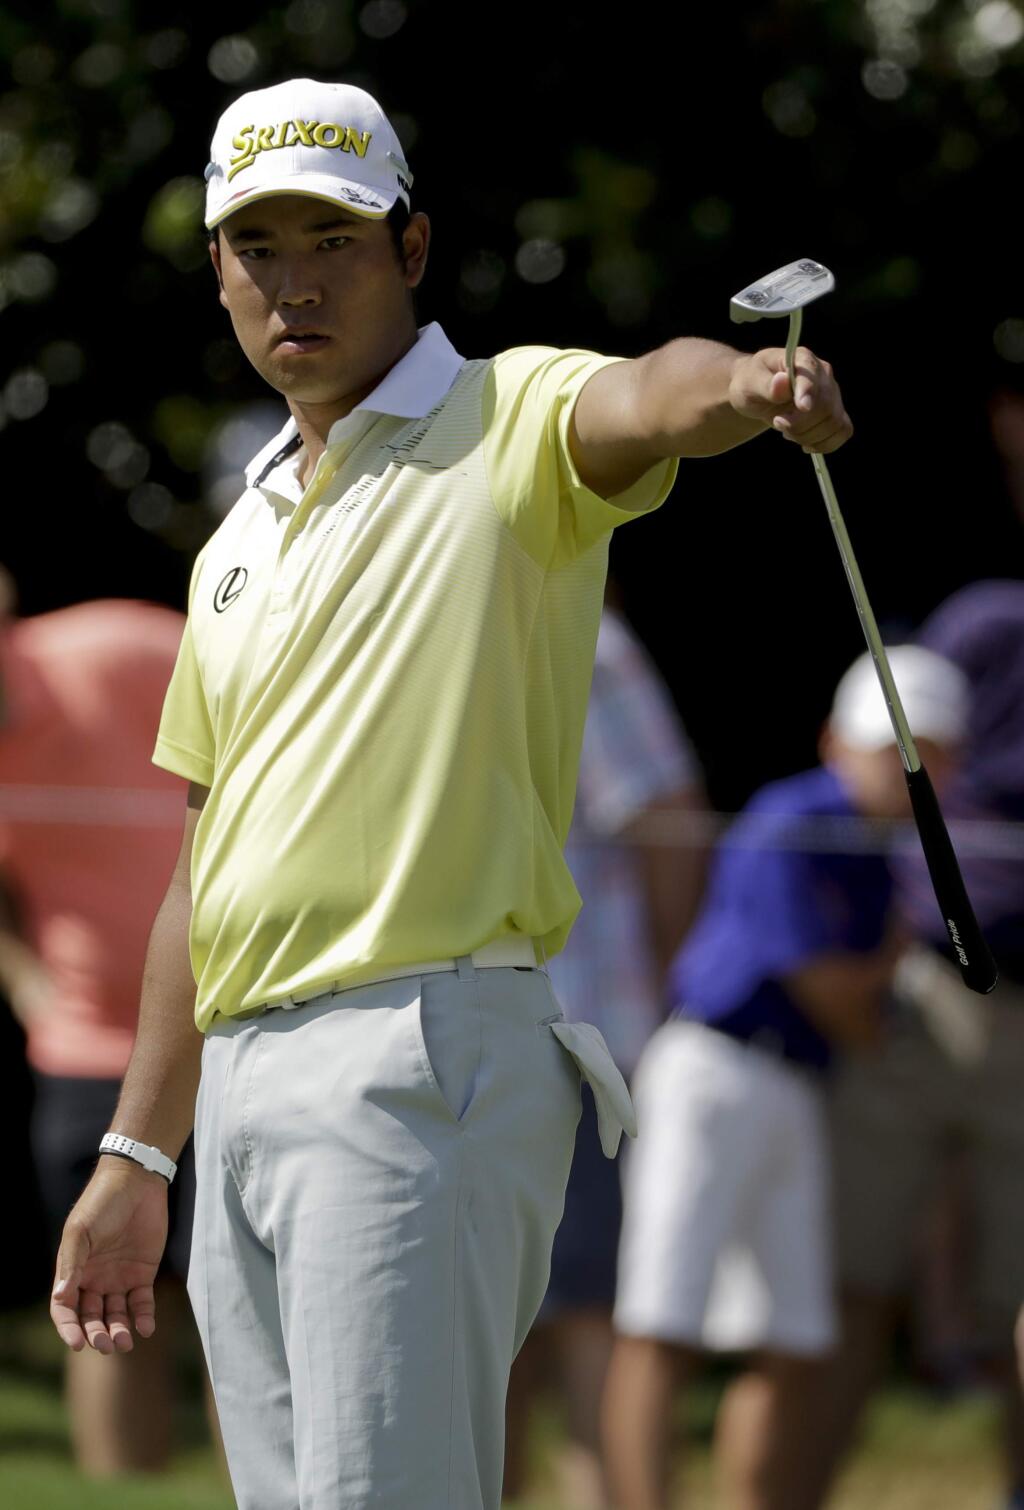 Hideki Matsuyama of Japan, watches his putt on the sixth hole during the third round of the PGA Championship golf tournament at the Quail Hollow Club Saturday, Aug. 12, 2017, in Charlotte, N.C. (AP Photo/Chris O'Meara)